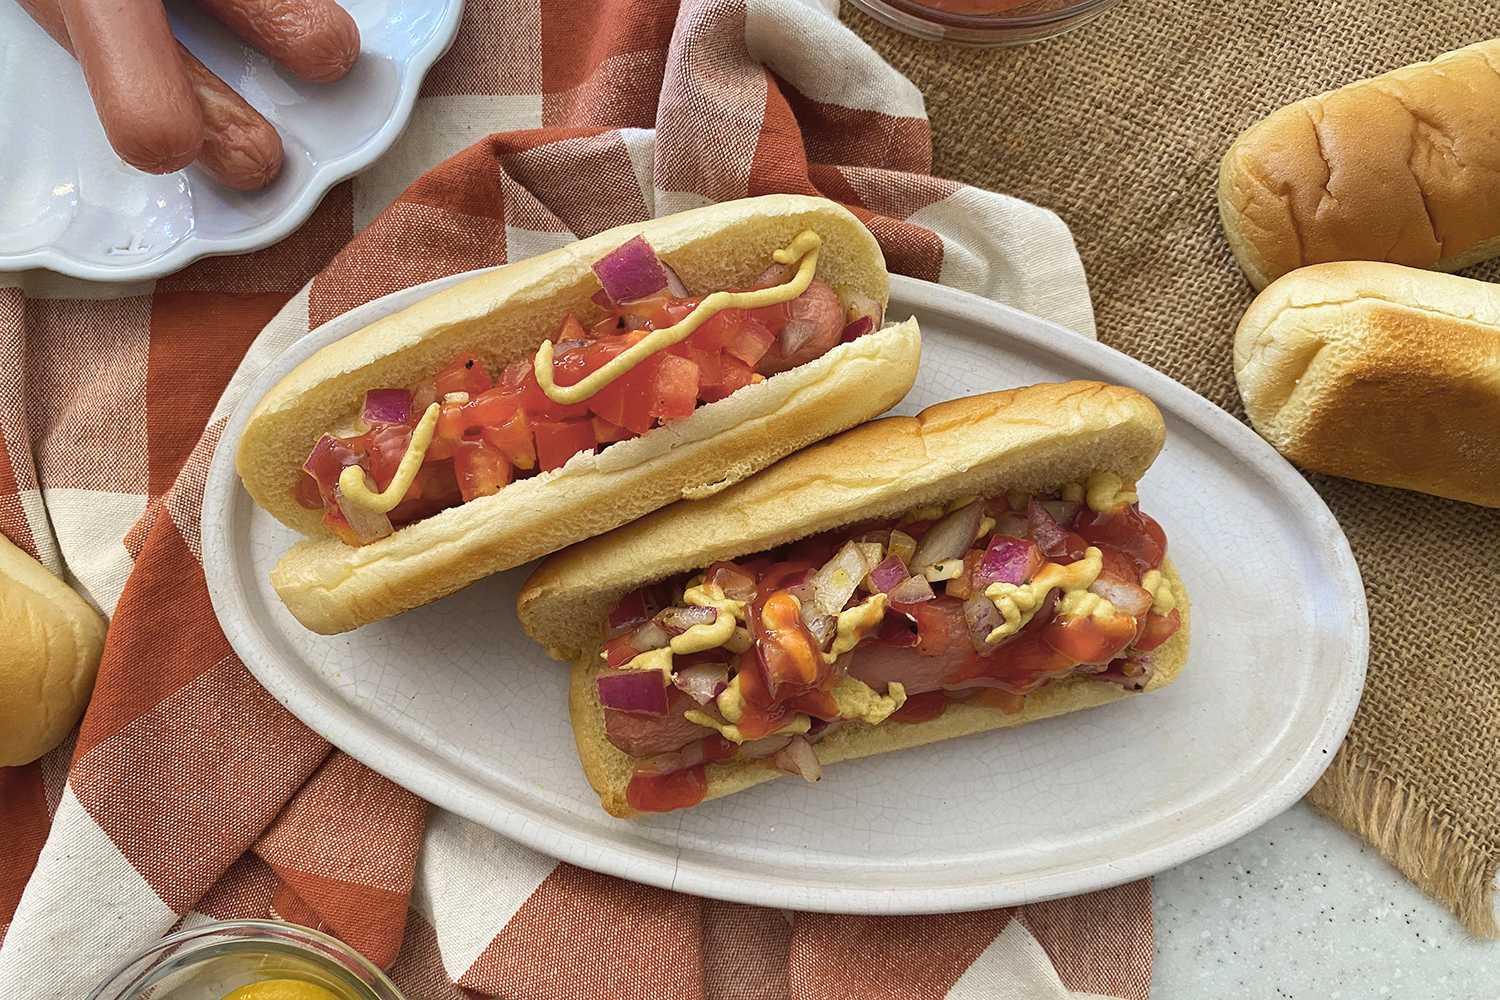 How To Keep Hot Dogs Warm & Delicious: Tips At Home & Picnic